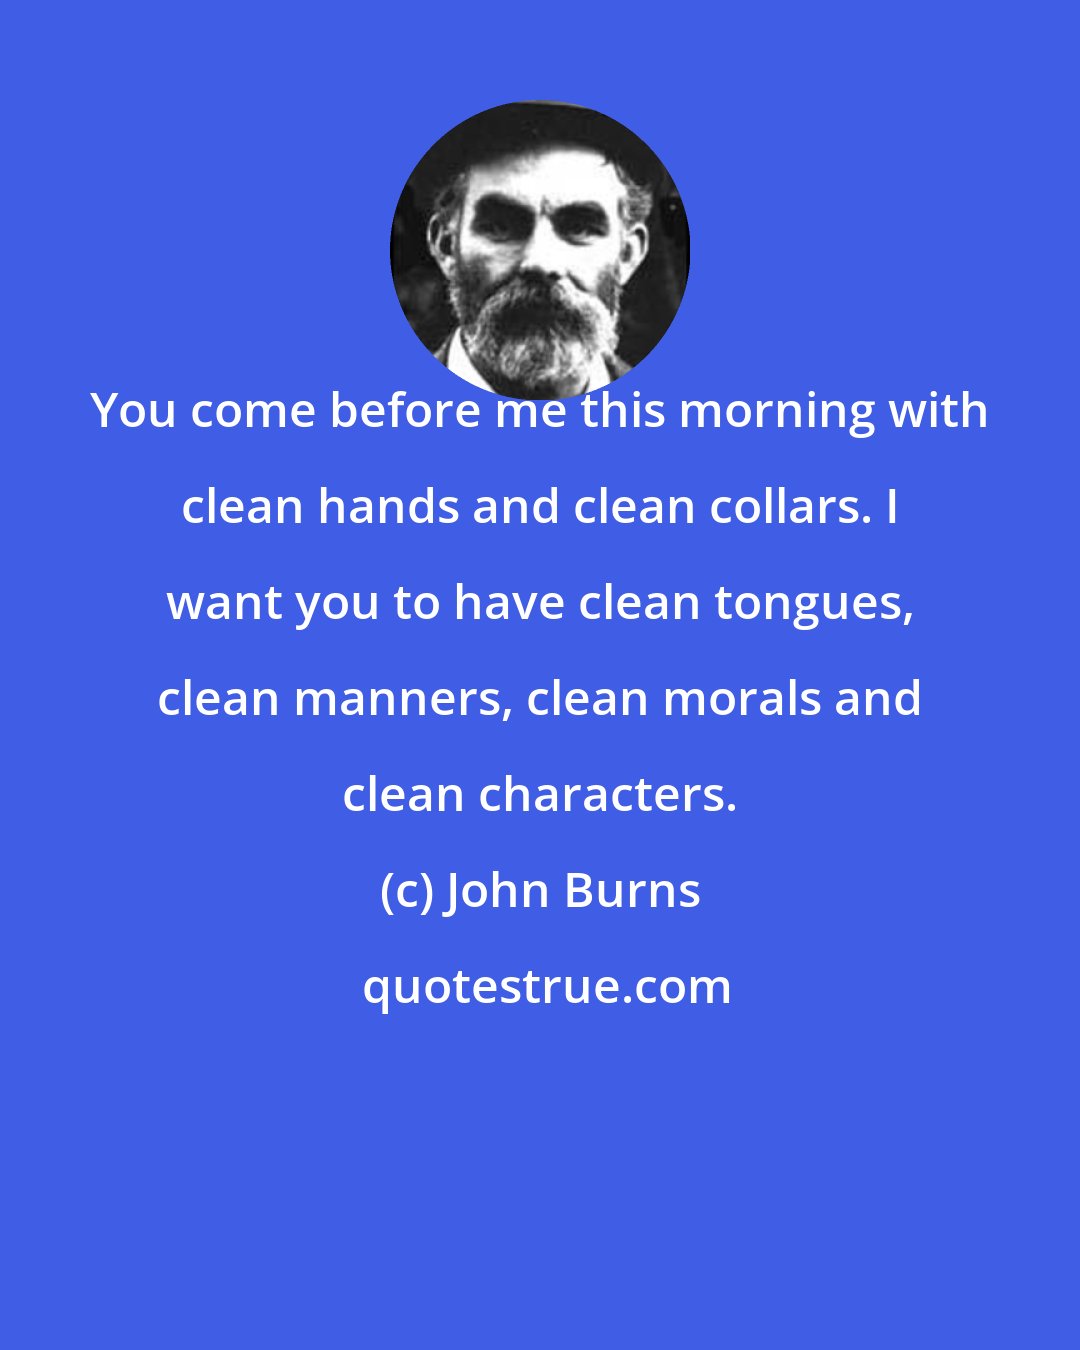 John Burns: You come before me this morning with clean hands and clean collars. I want you to have clean tongues, clean manners, clean morals and clean characters.